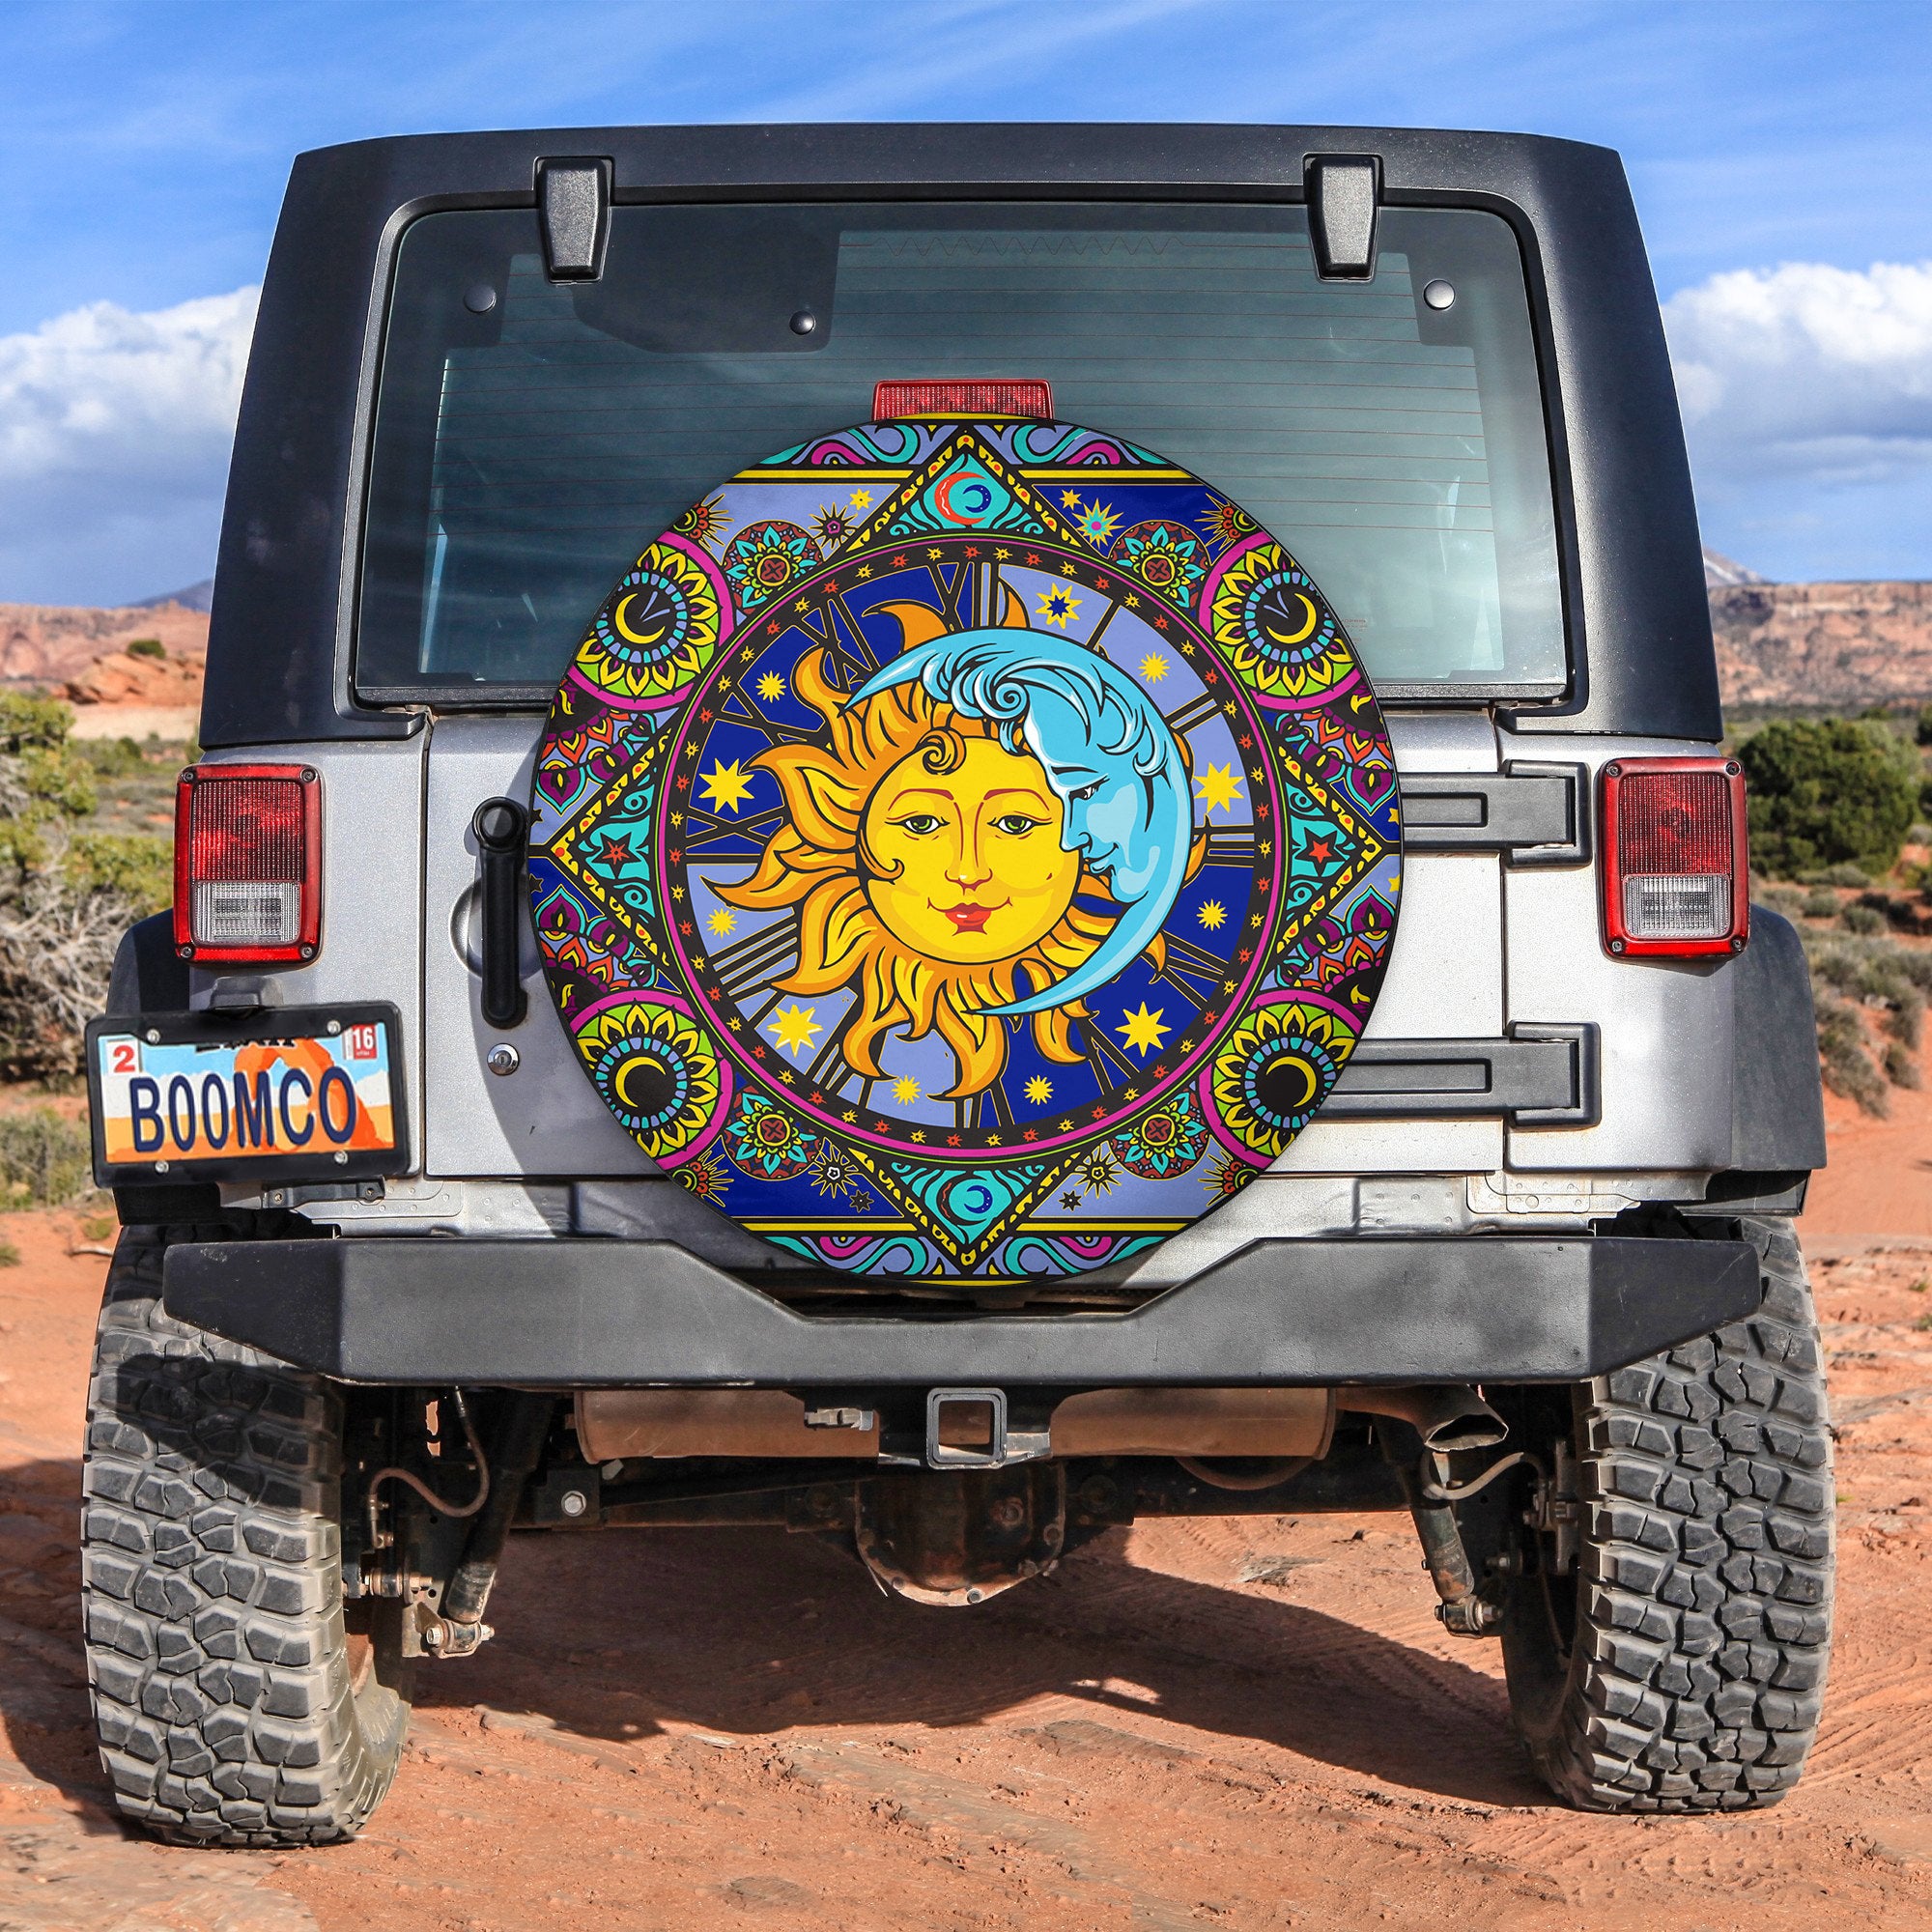 Suna Nd Moon Spare Tire Cover Gift For Campers Nearkii